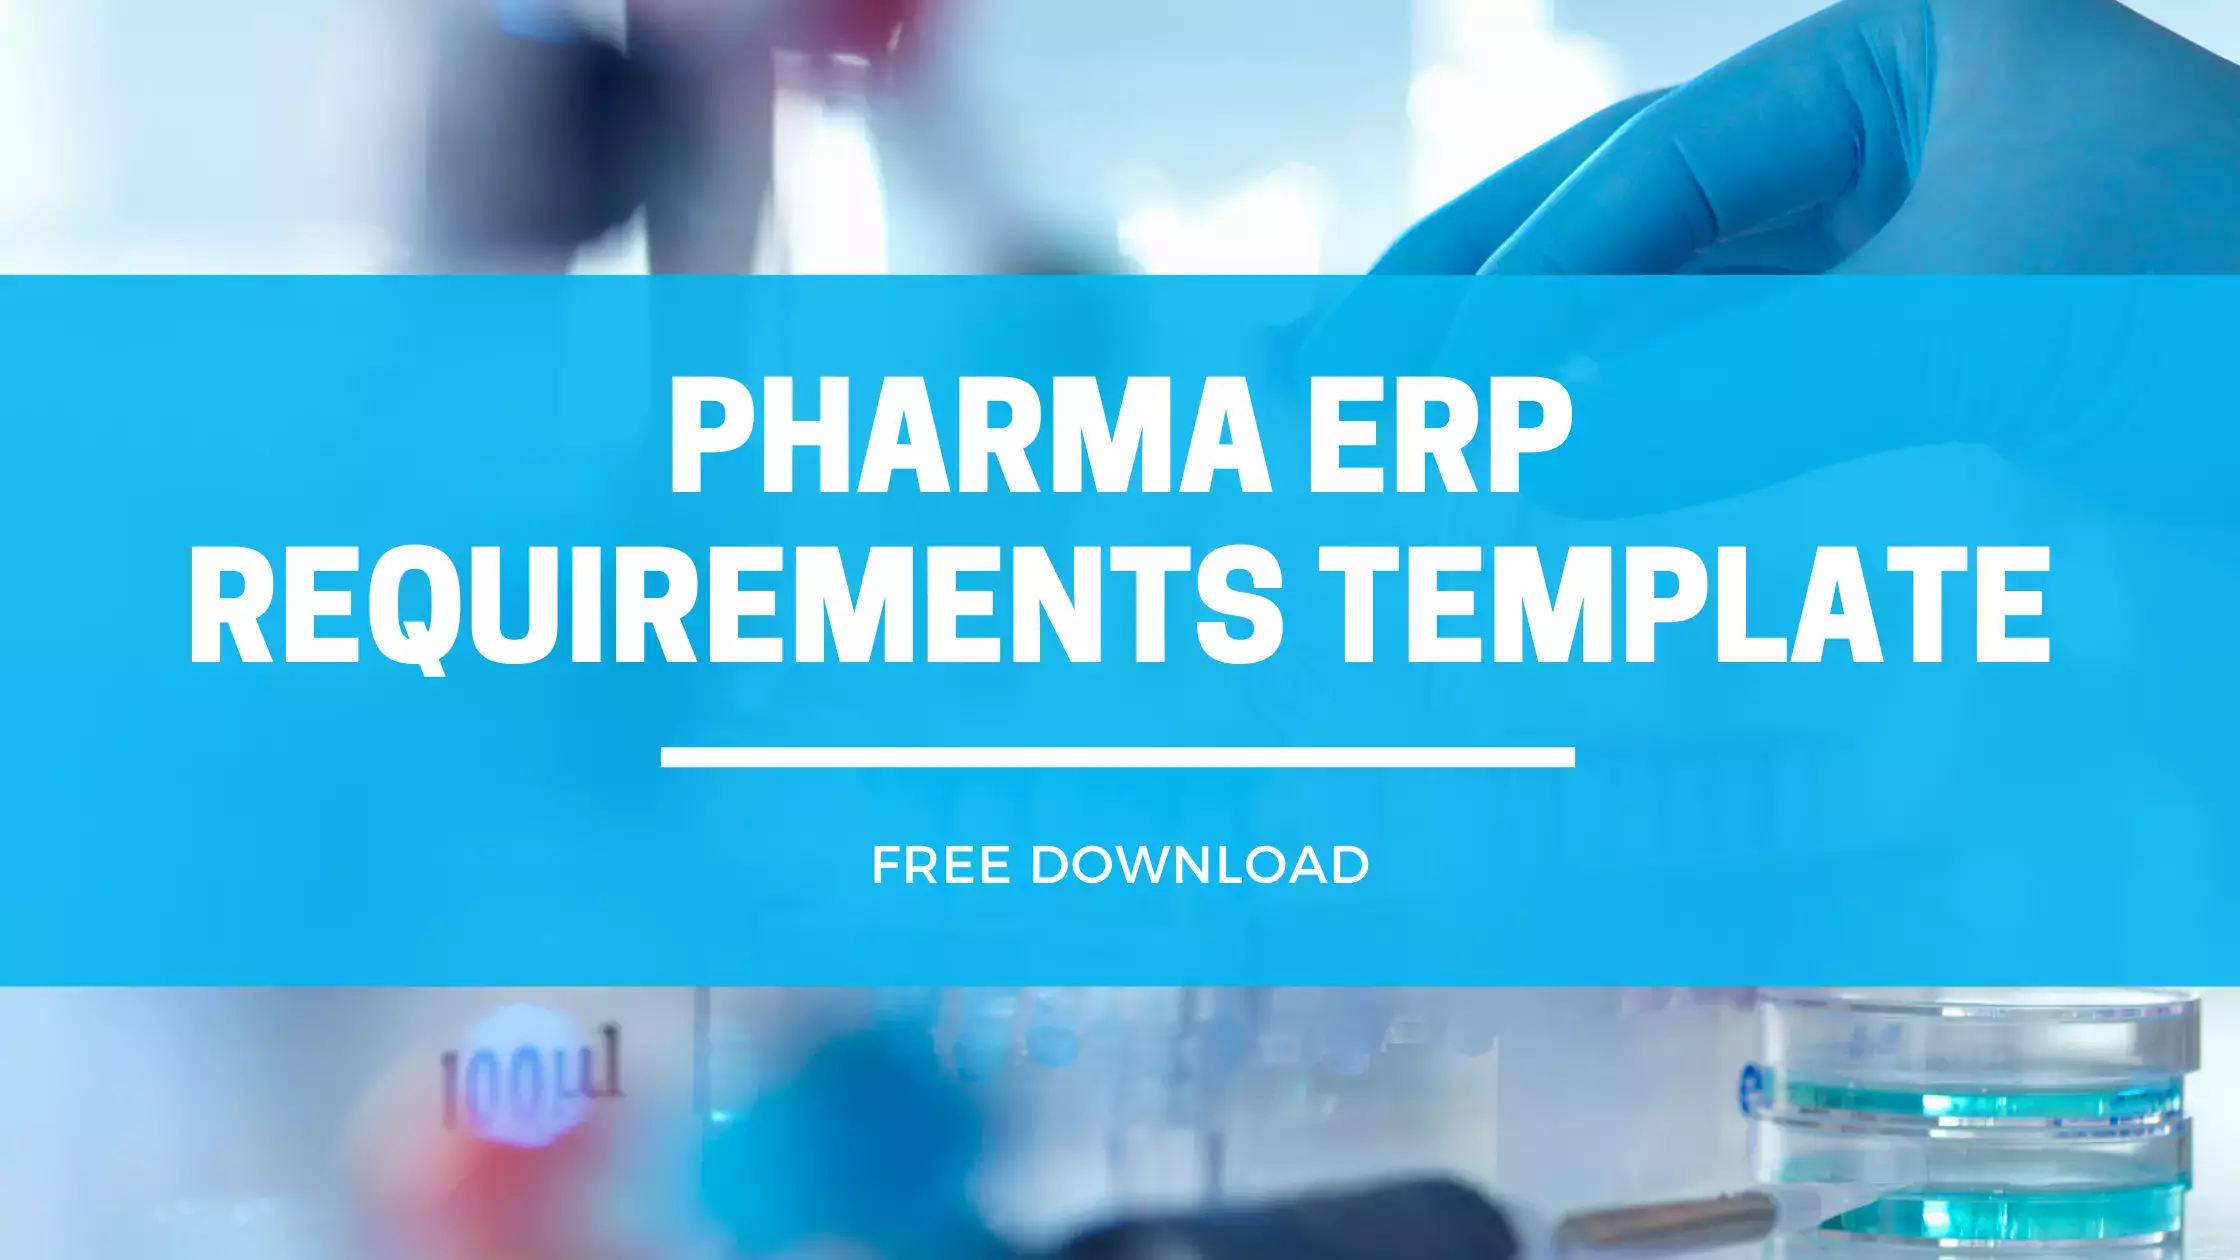 pharma erp requirements free template